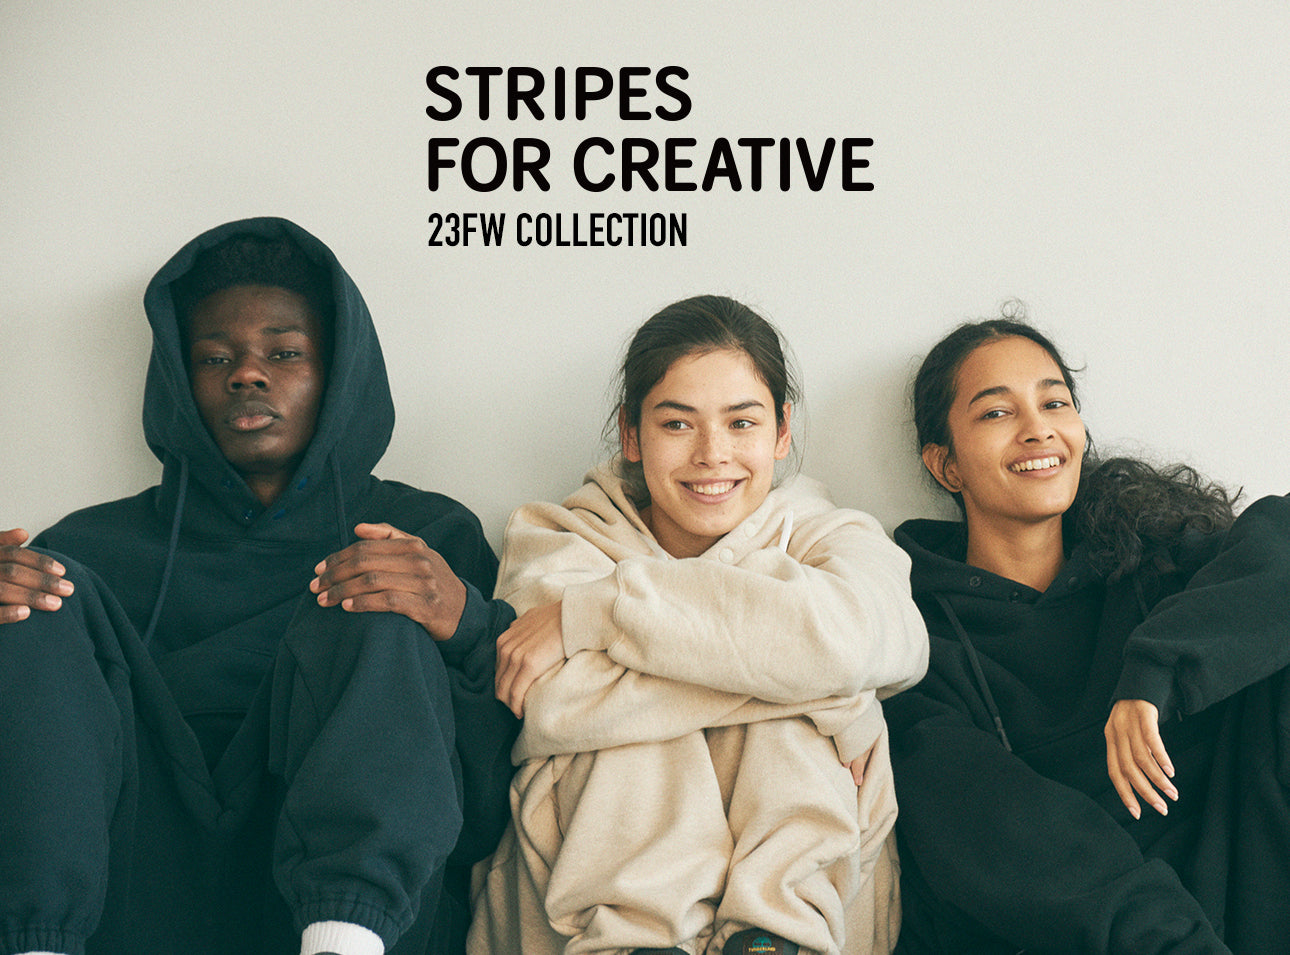 S.F.C Stripes For Creative 23FW COLLECTION